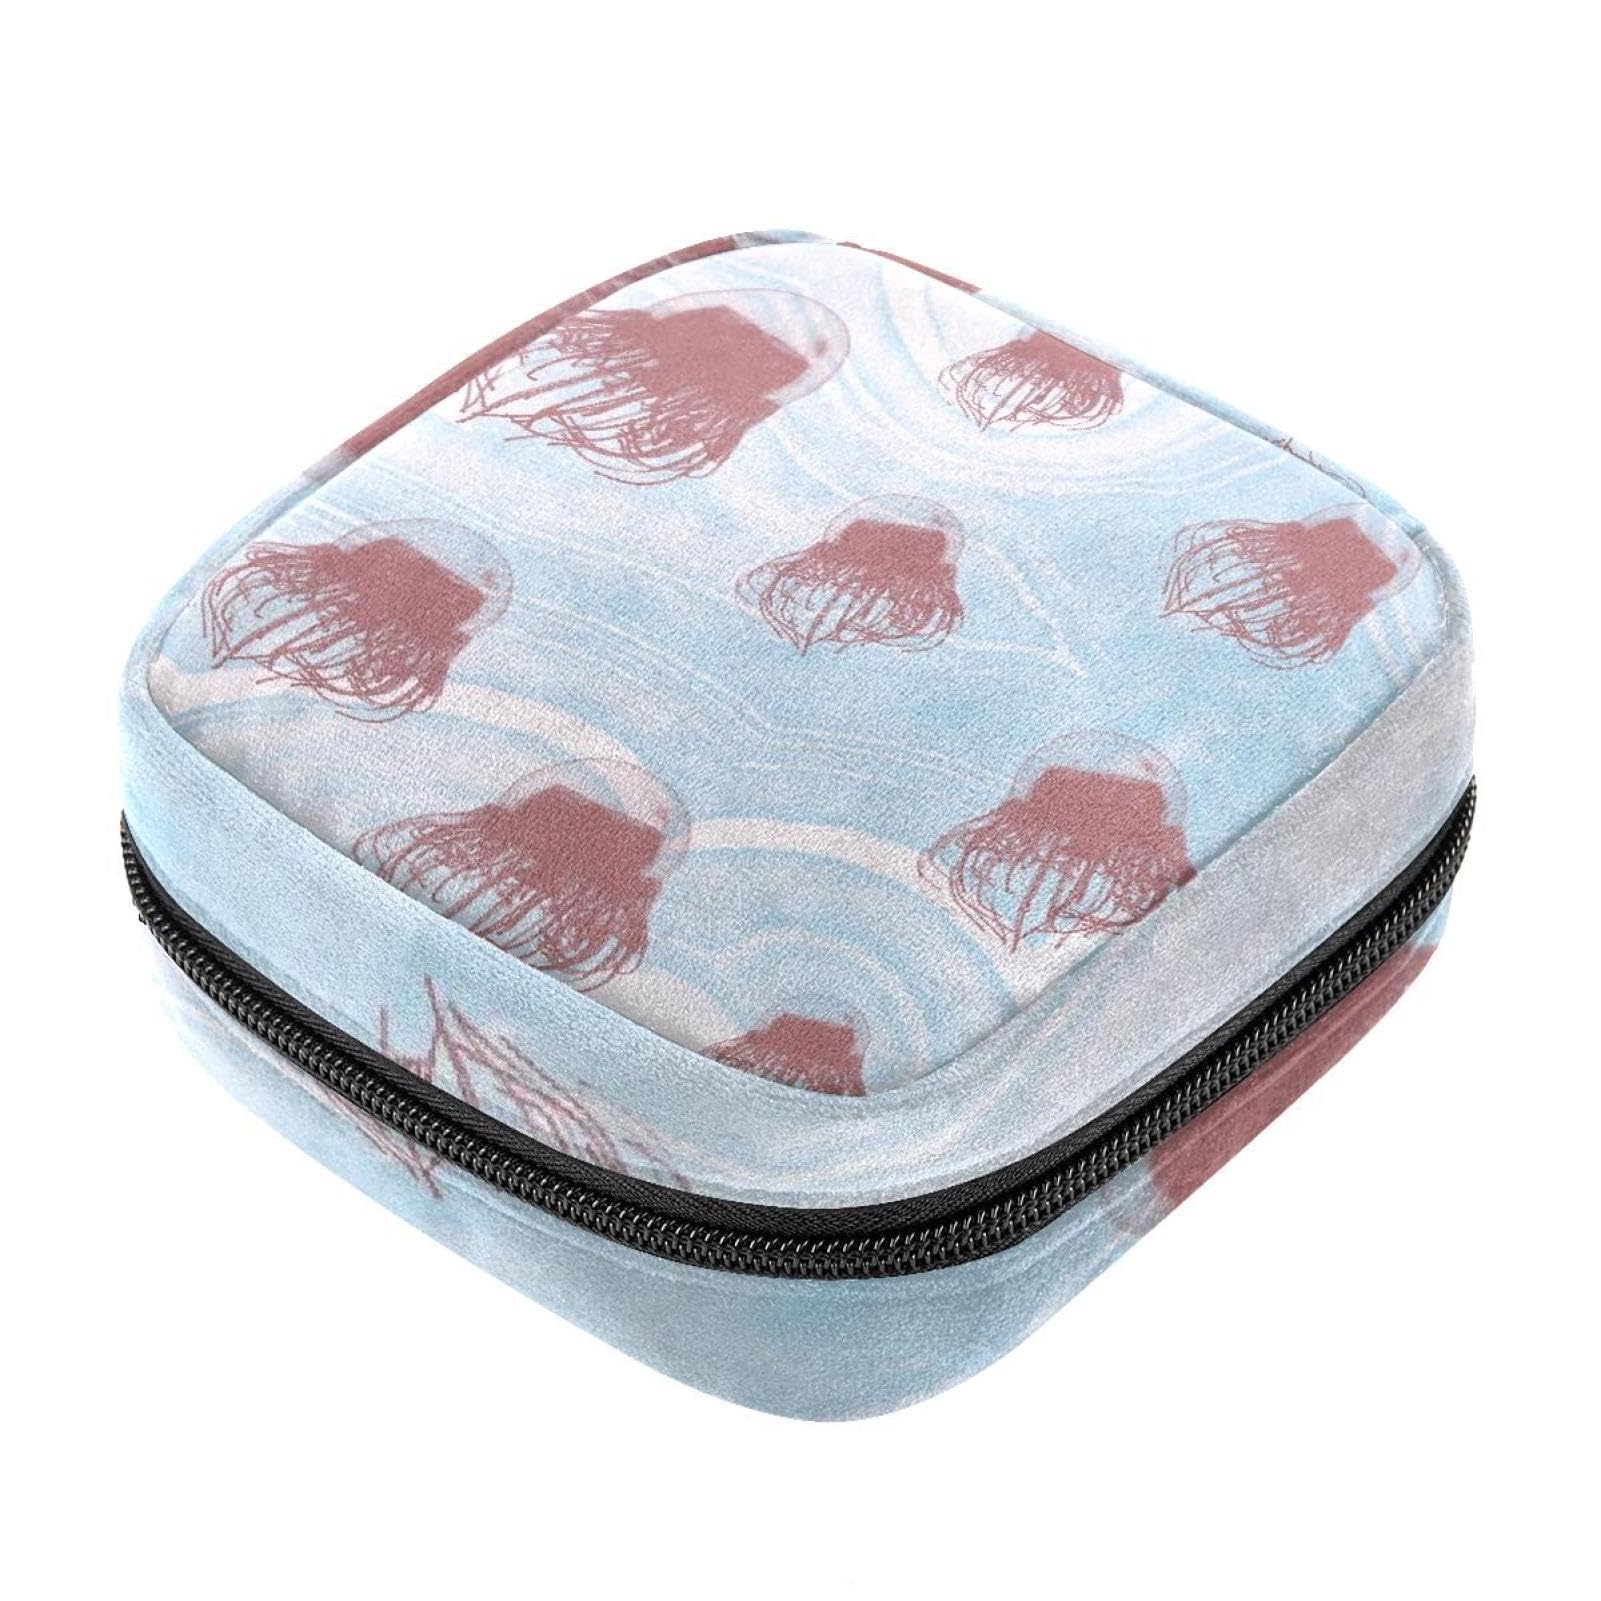  Bus,Period Pouch Portable,Tampon Storage Bag,Tampon Holder for  Purse Feminine Product Organizer : Health & Household